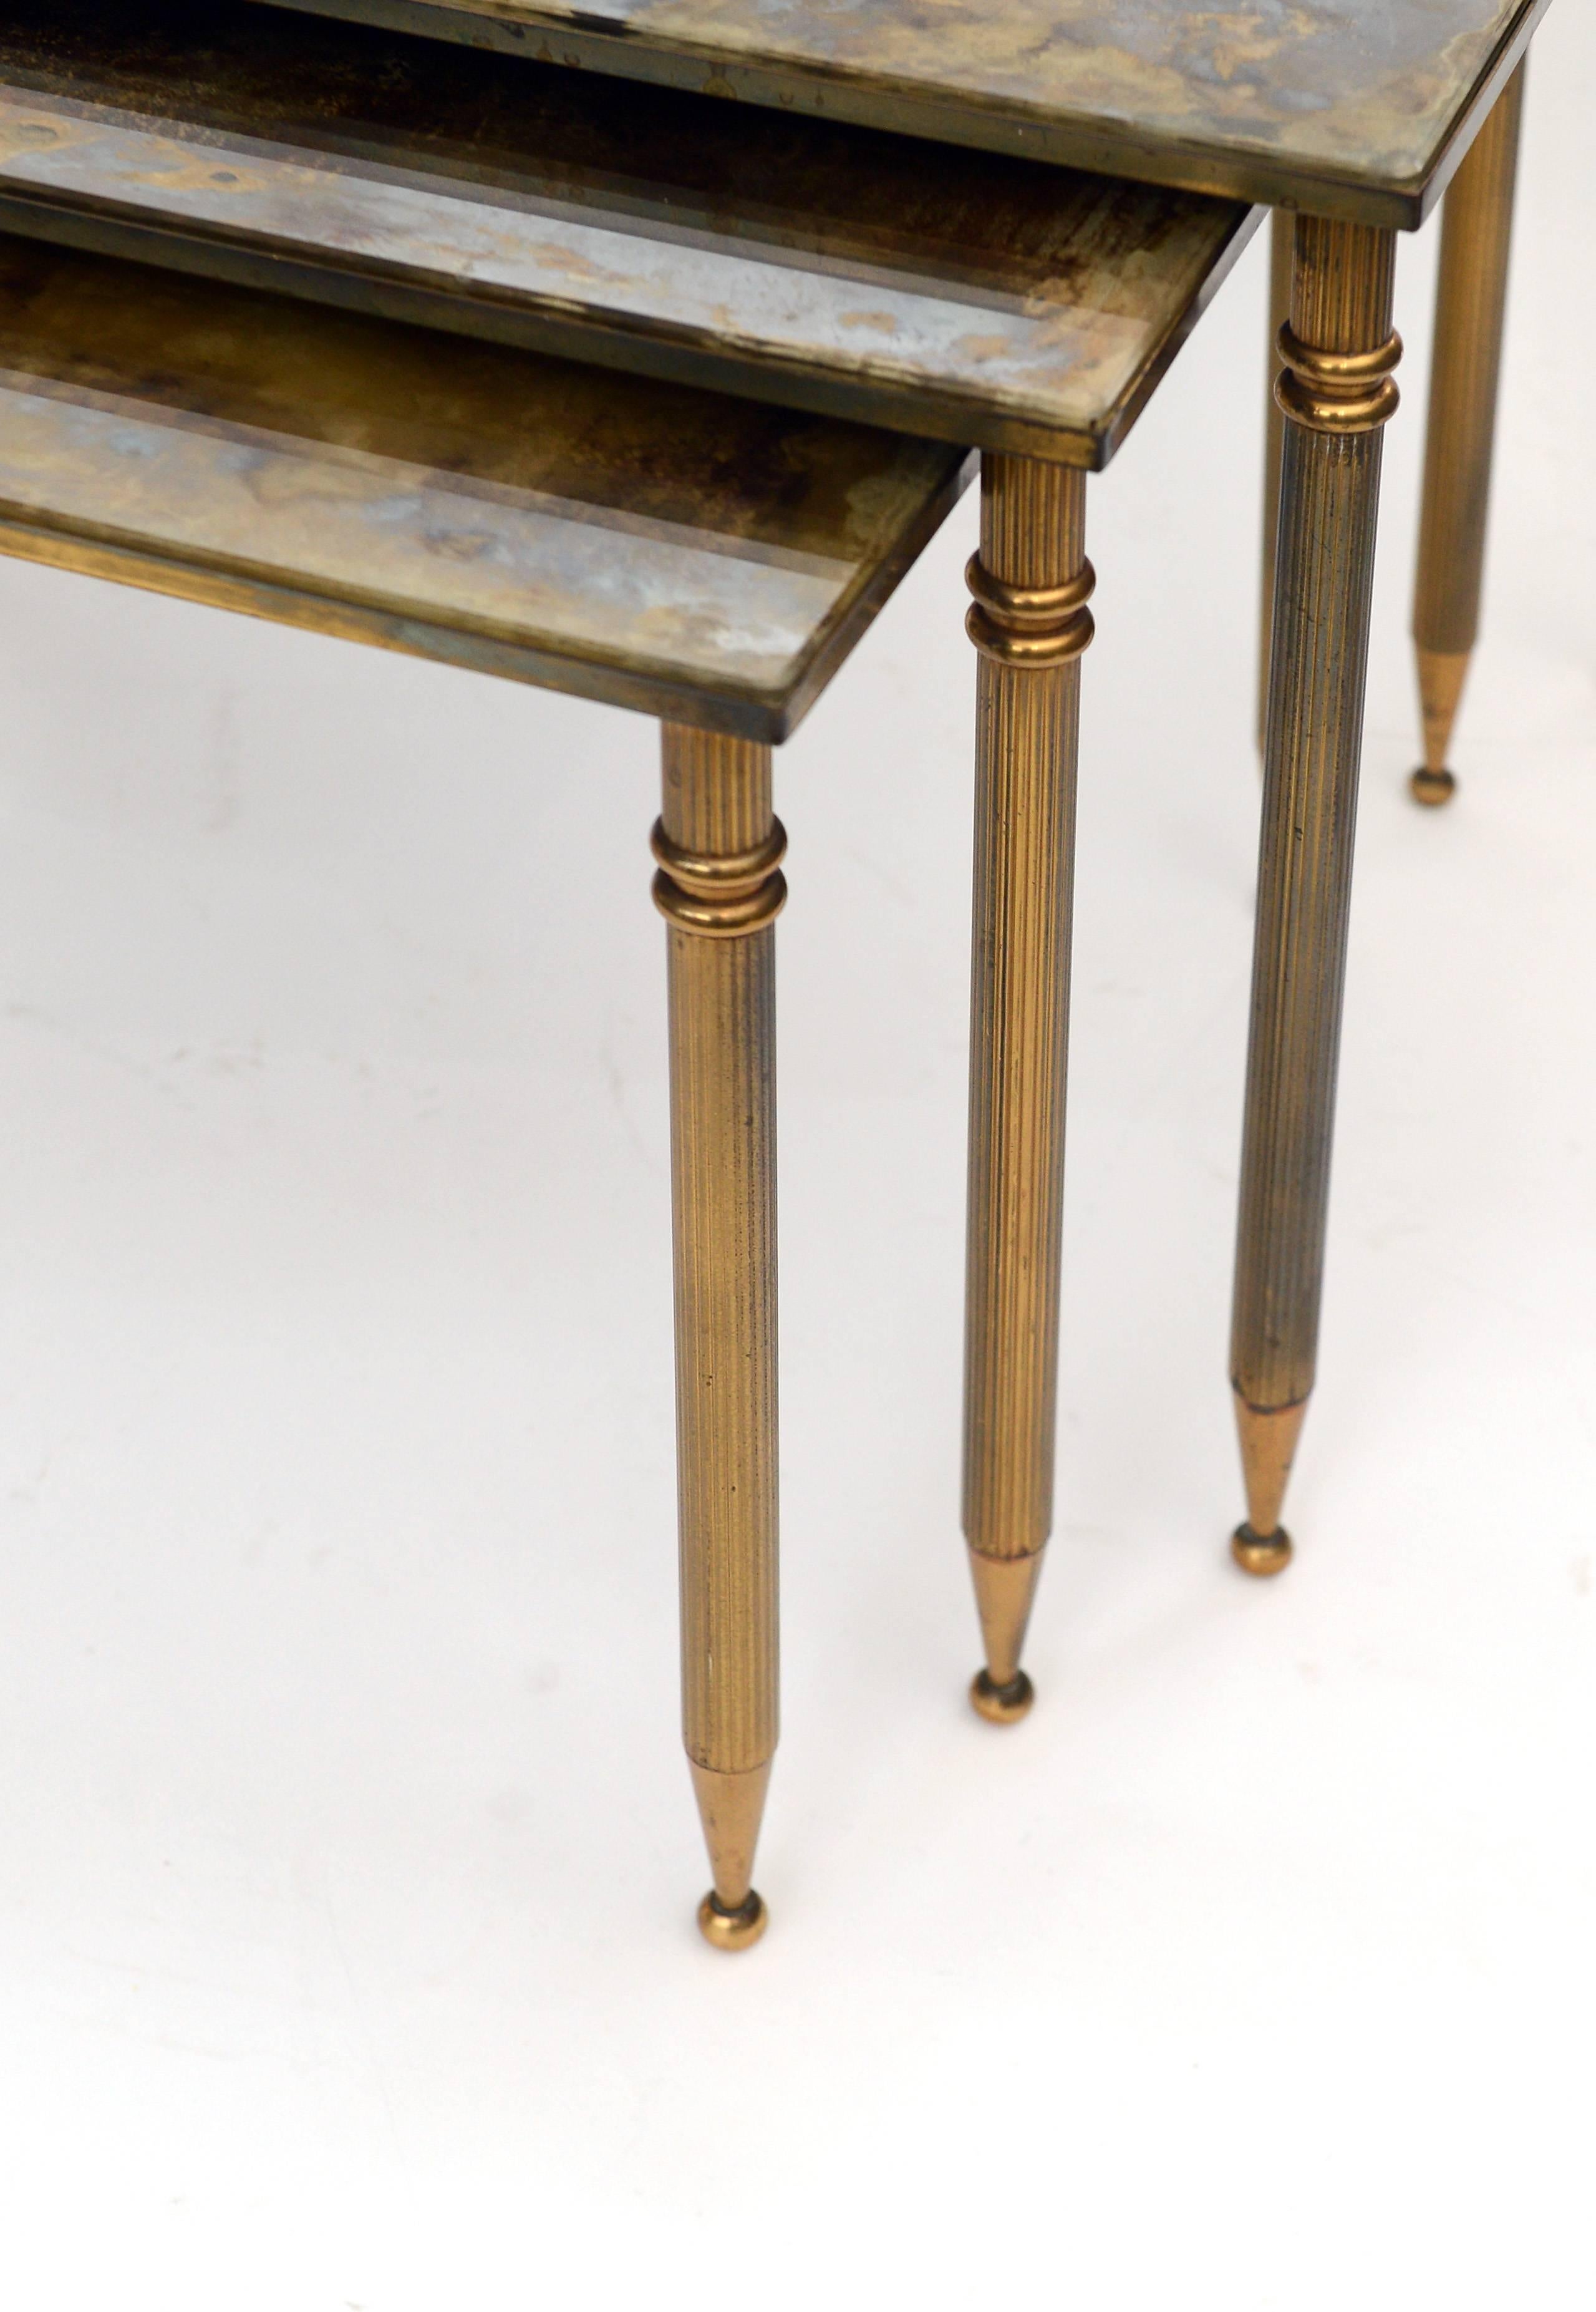 A set of elegant brass neoclassical nesting tables with dark patinated glass tops.

The whole set has a beautiful 'aged' look.

The glass of the largest tables shows some scratches.

Maison Jansen, maison bagues style.

1950s - France

The